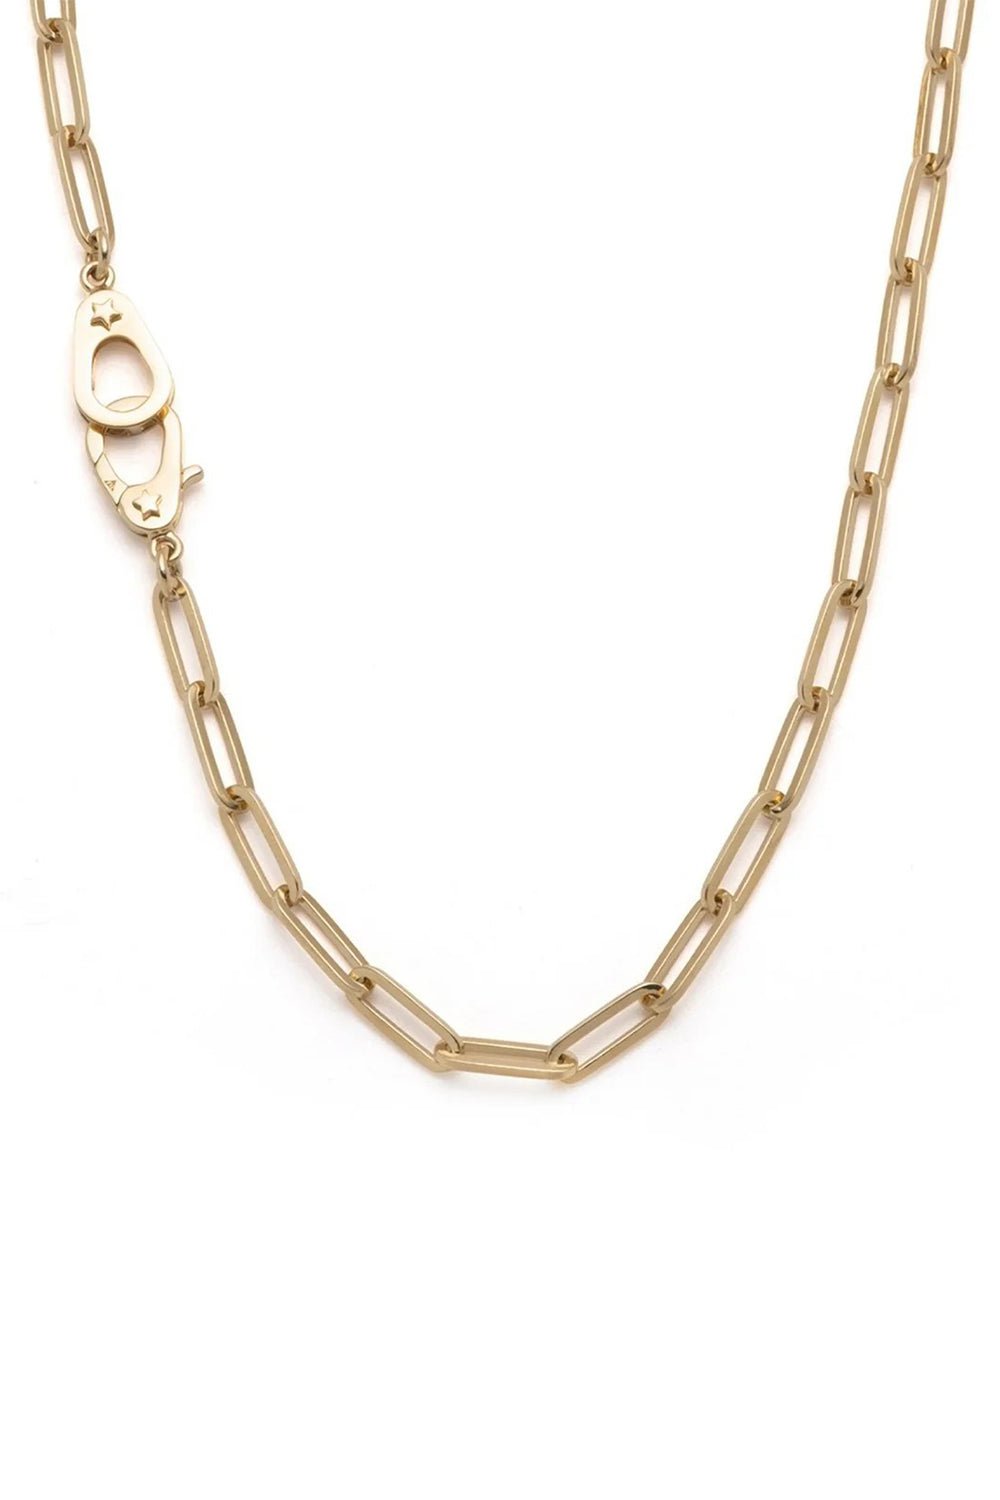 FOUNDRAE-Sister Hook Classic FOB Clip Chain-YELLOW GOLD